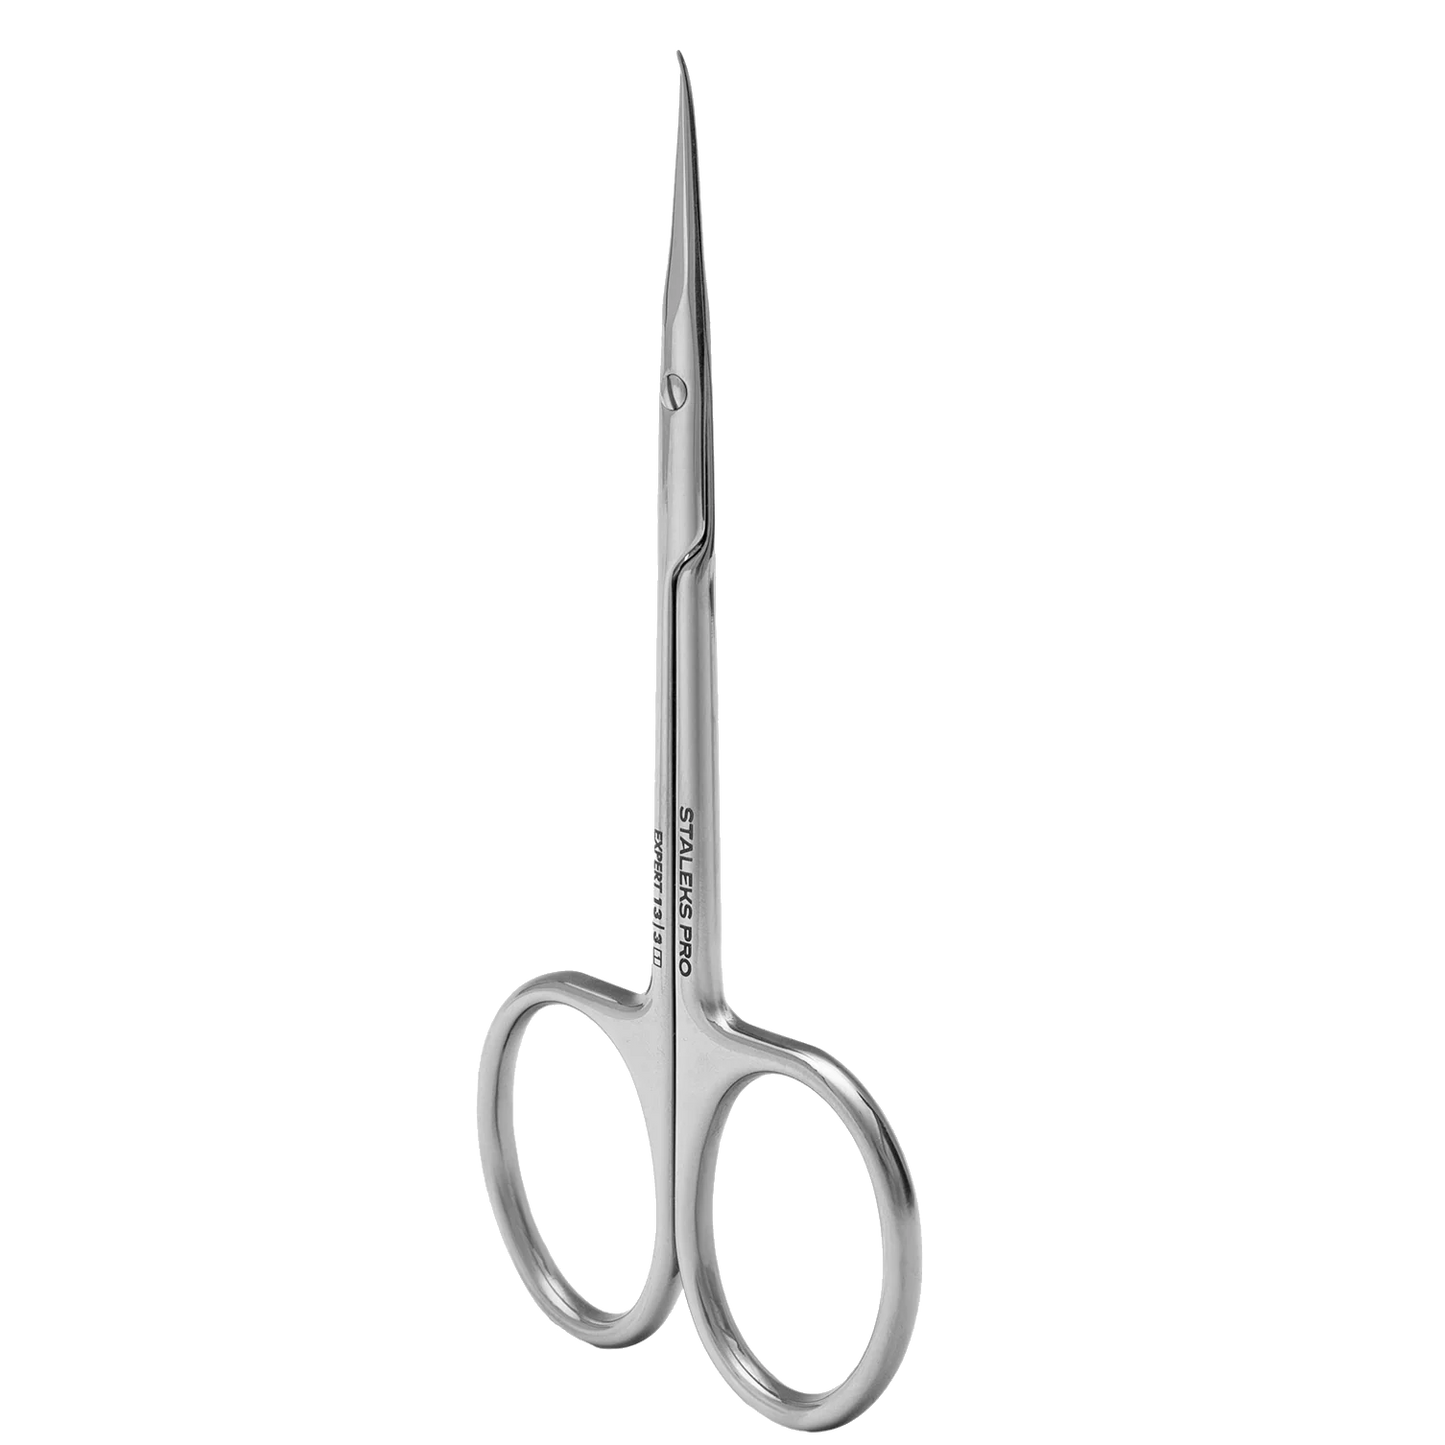 Professional cuticle scissors for left-handed users EXPERT 13 TYPE 3 -SE-13/3